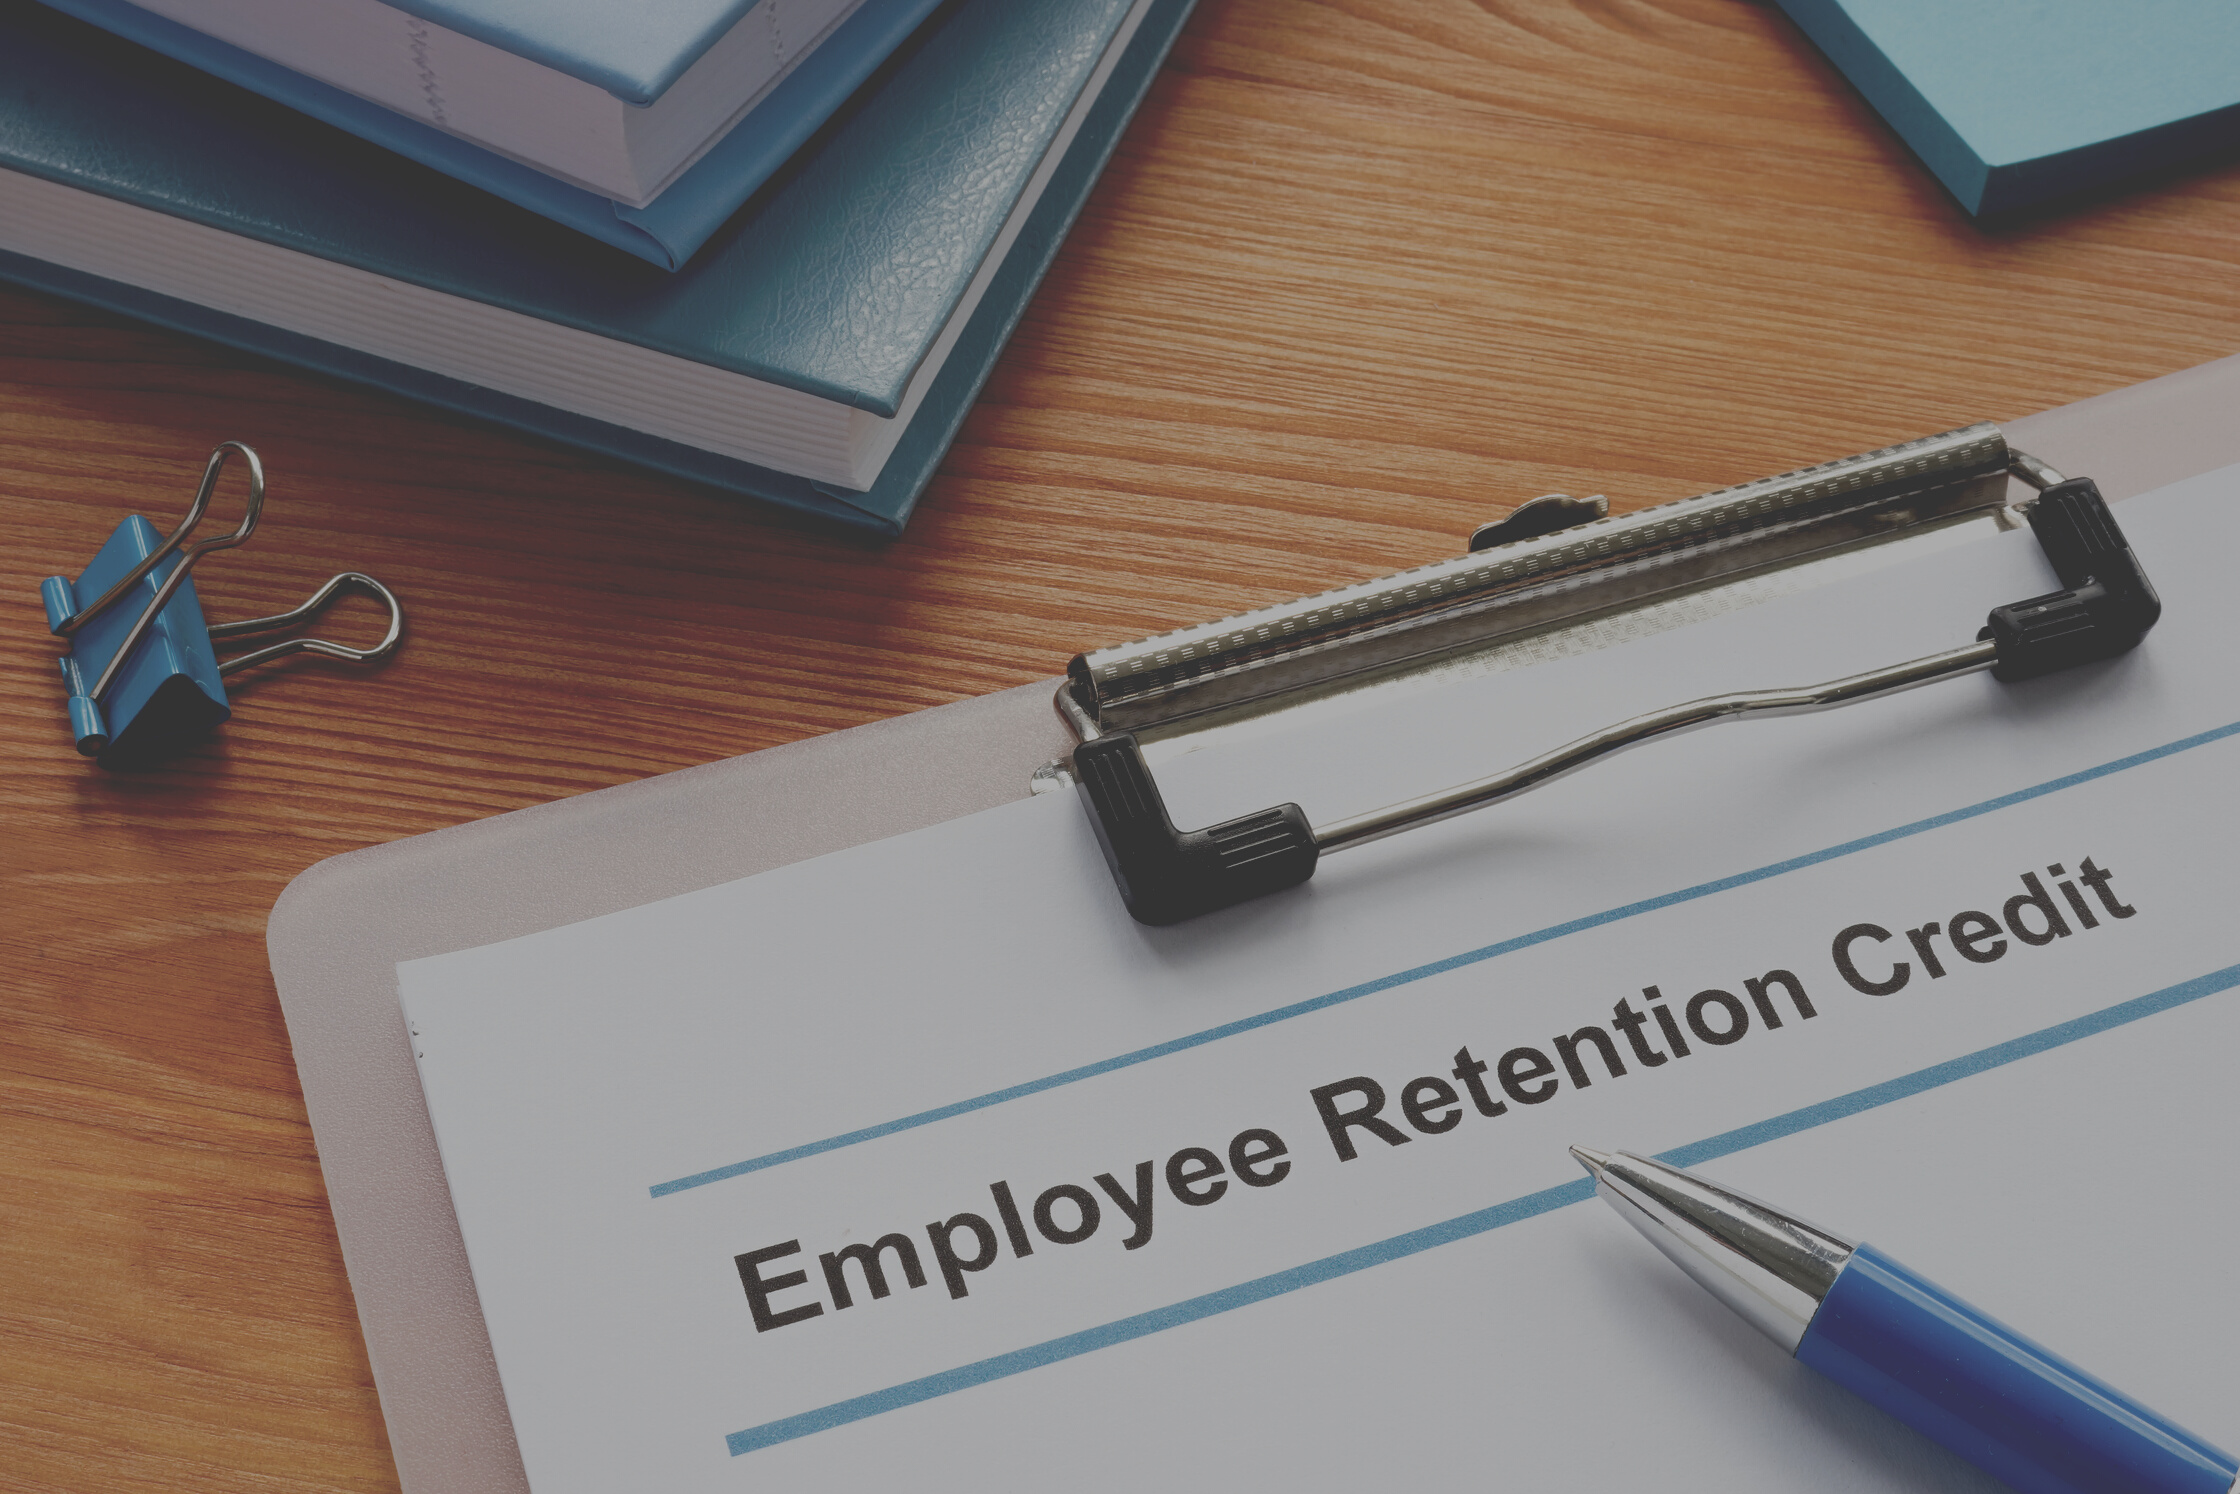 Employee retention credit application and a clipboard.